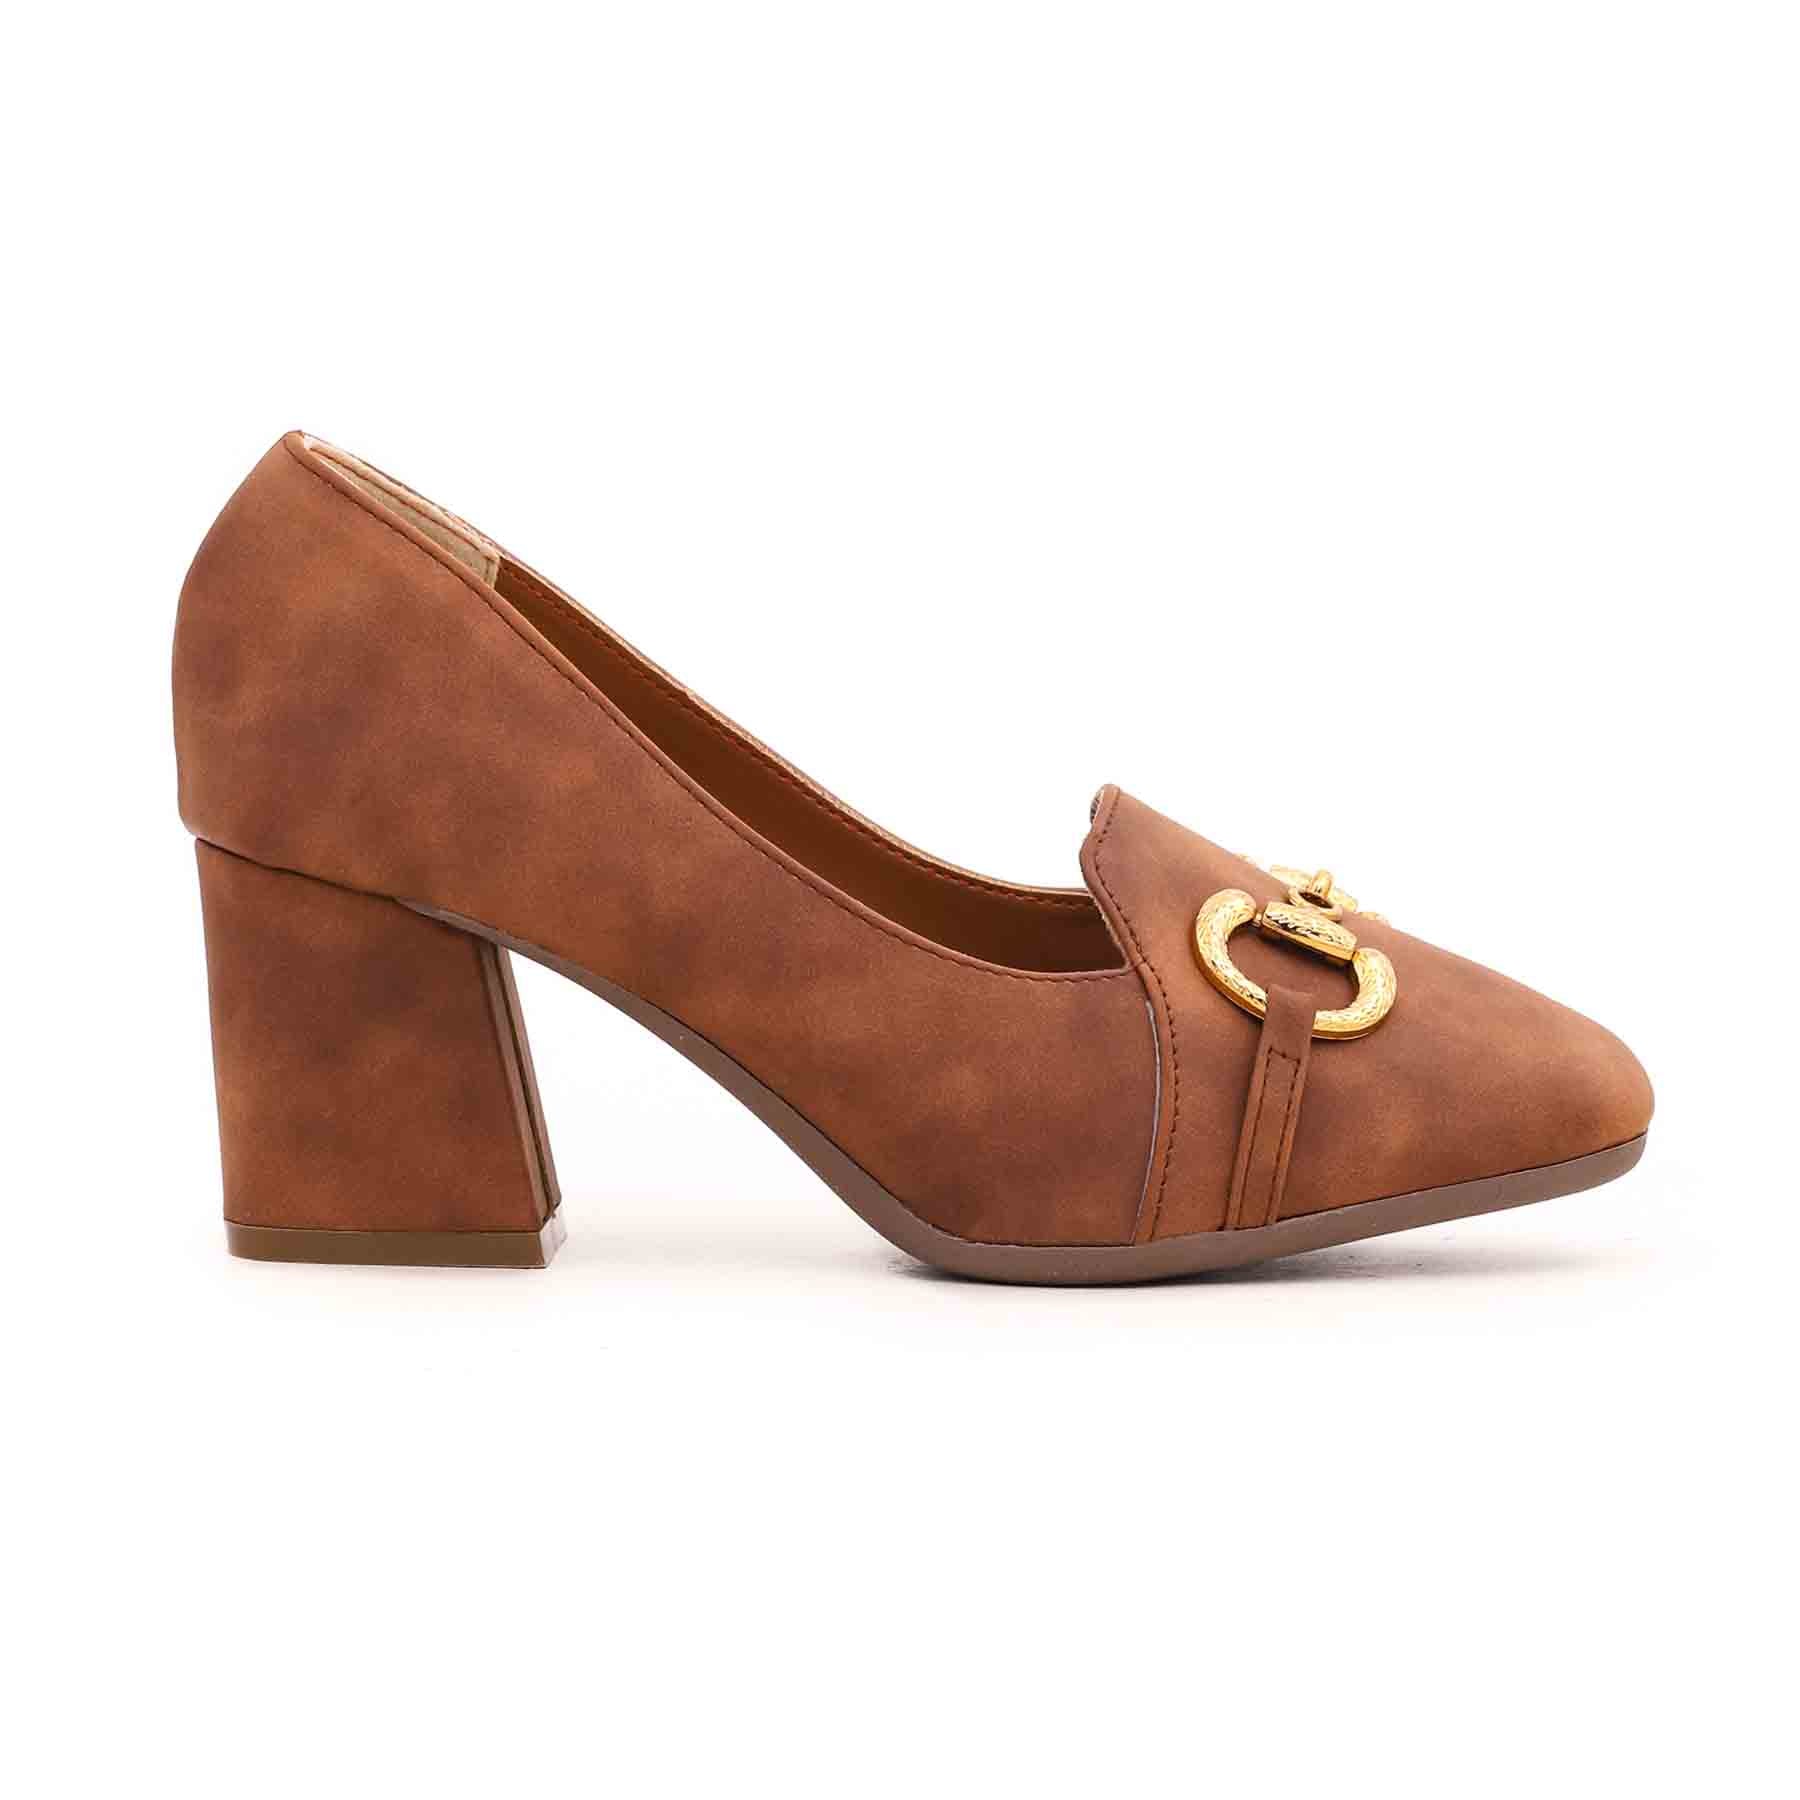 Brown Court Shoes WN7302